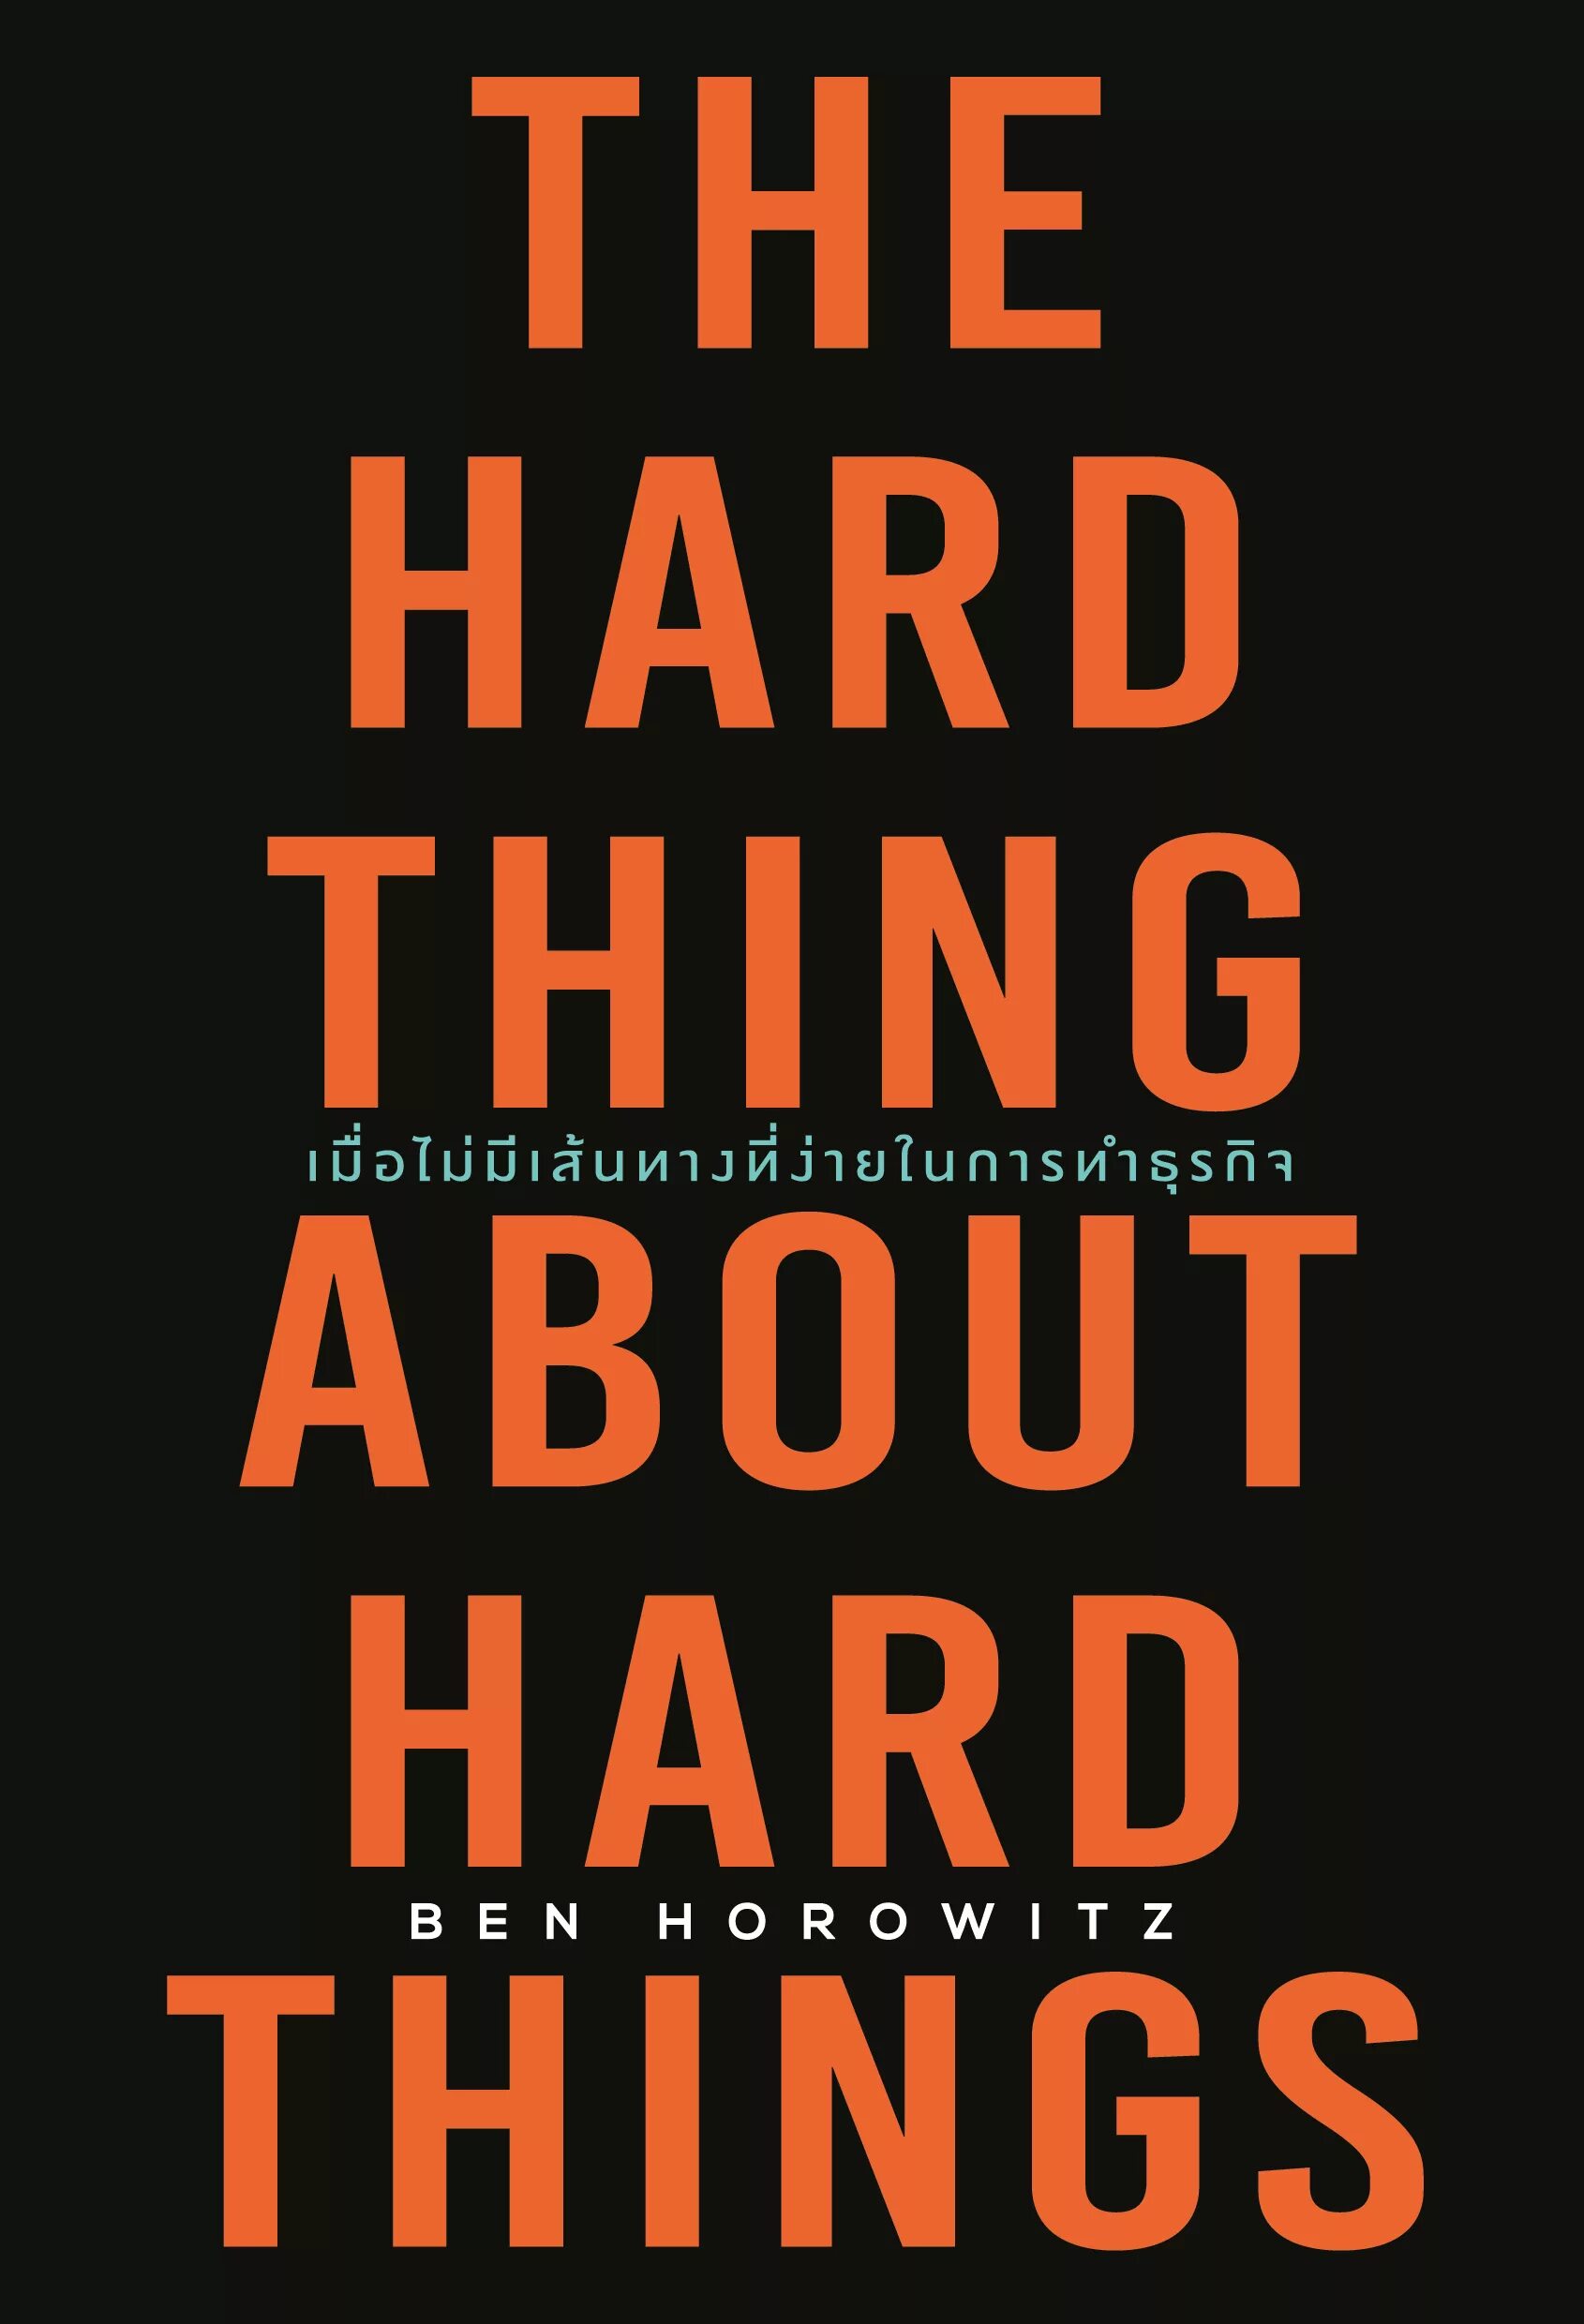 The hard thing about hard things. The hard thing about hard things by Ben Horowitz. The hard thing about hard things Full Cover. The hard thing about hard things (Leadership) Ben Horowitz. Hard things about hard things